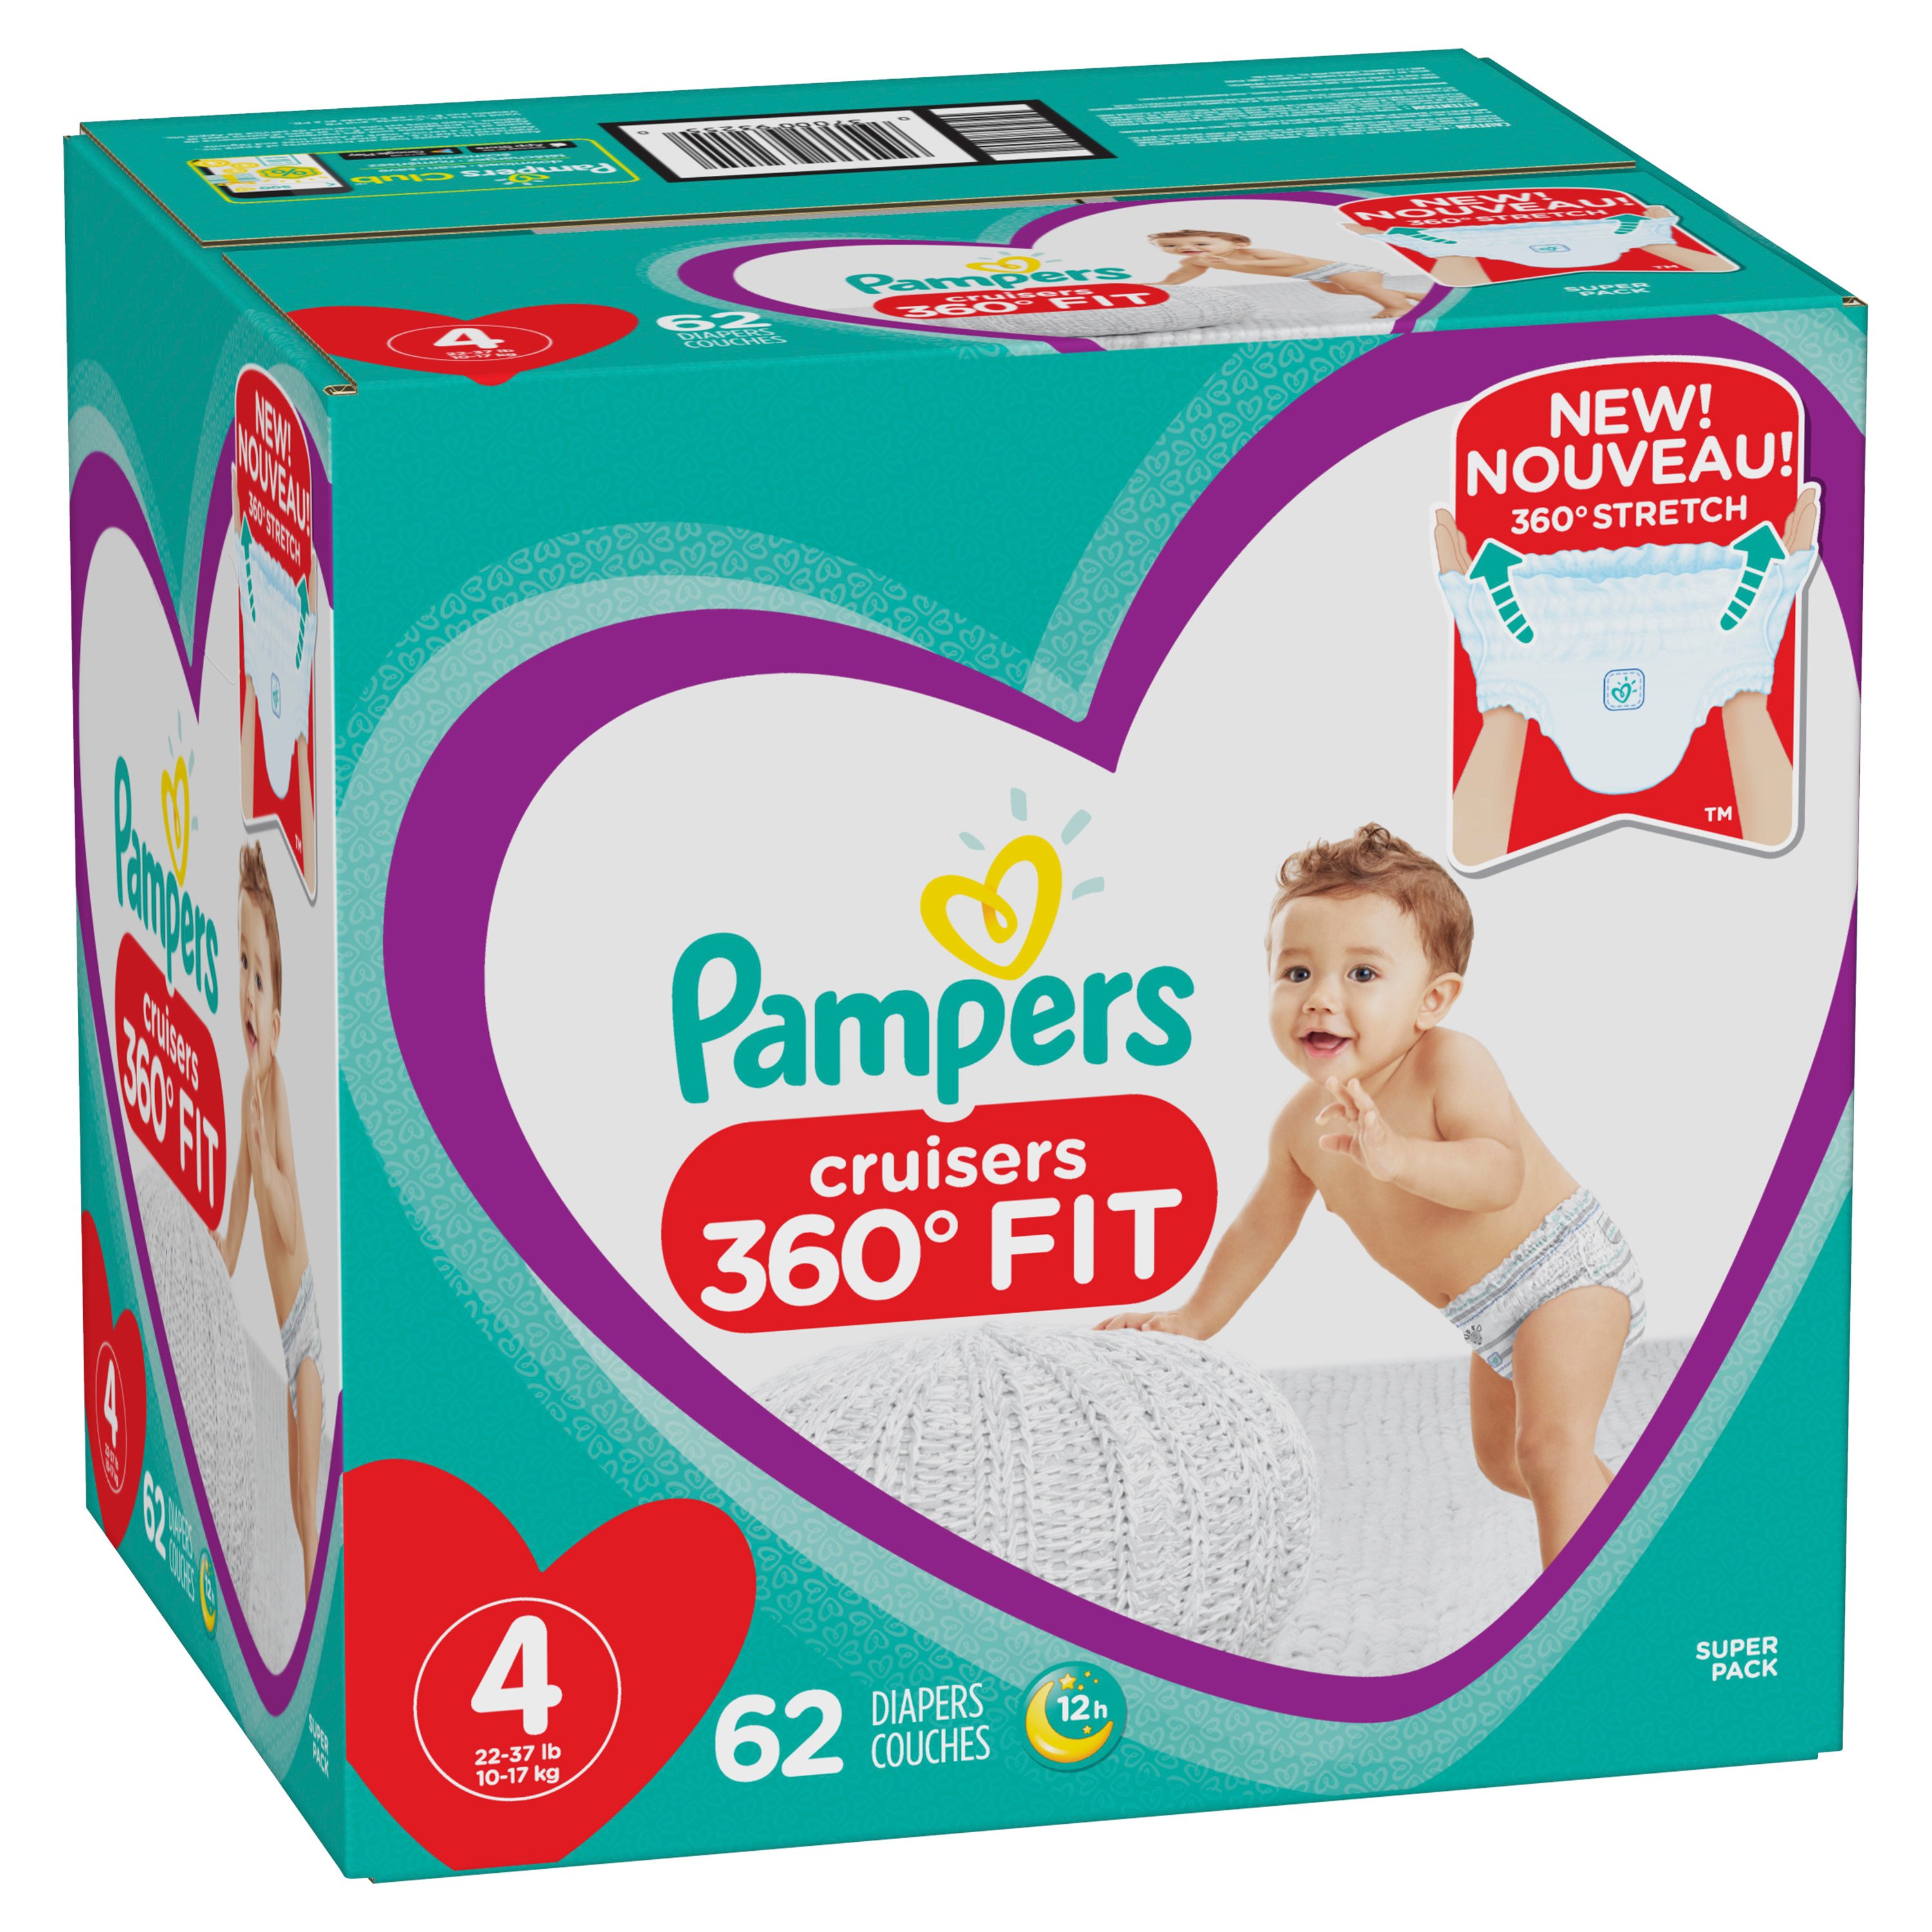 Pampers Cruisers 360 Fit Diapers Size 4 - Shop Diapers at ...